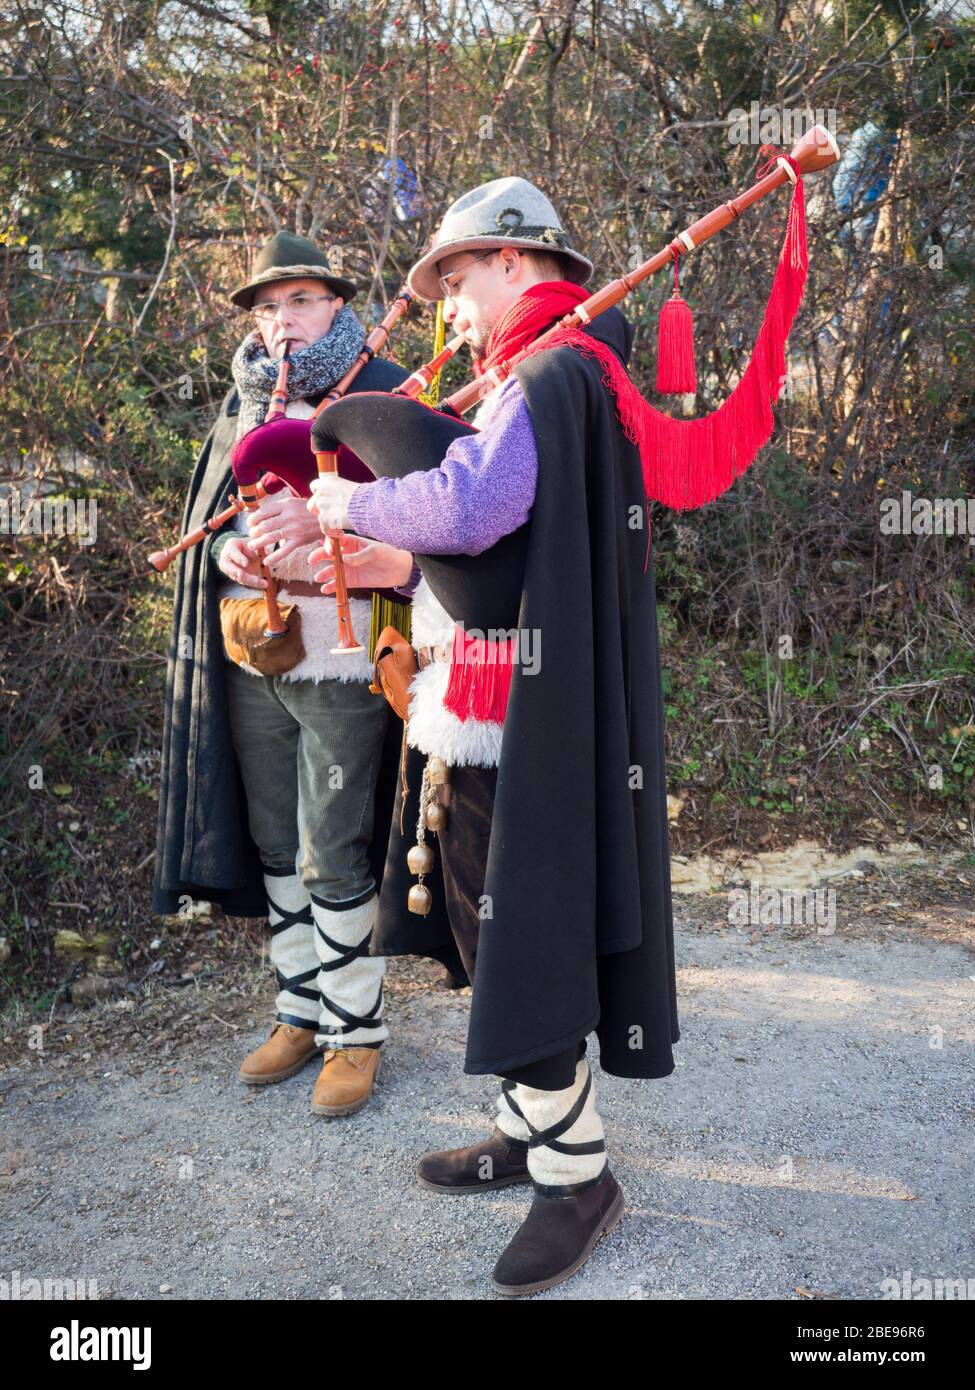 Vicenza, Italy - December 29, 2019: Bagpipe players in gowns during a traditional festival. Stock Photo